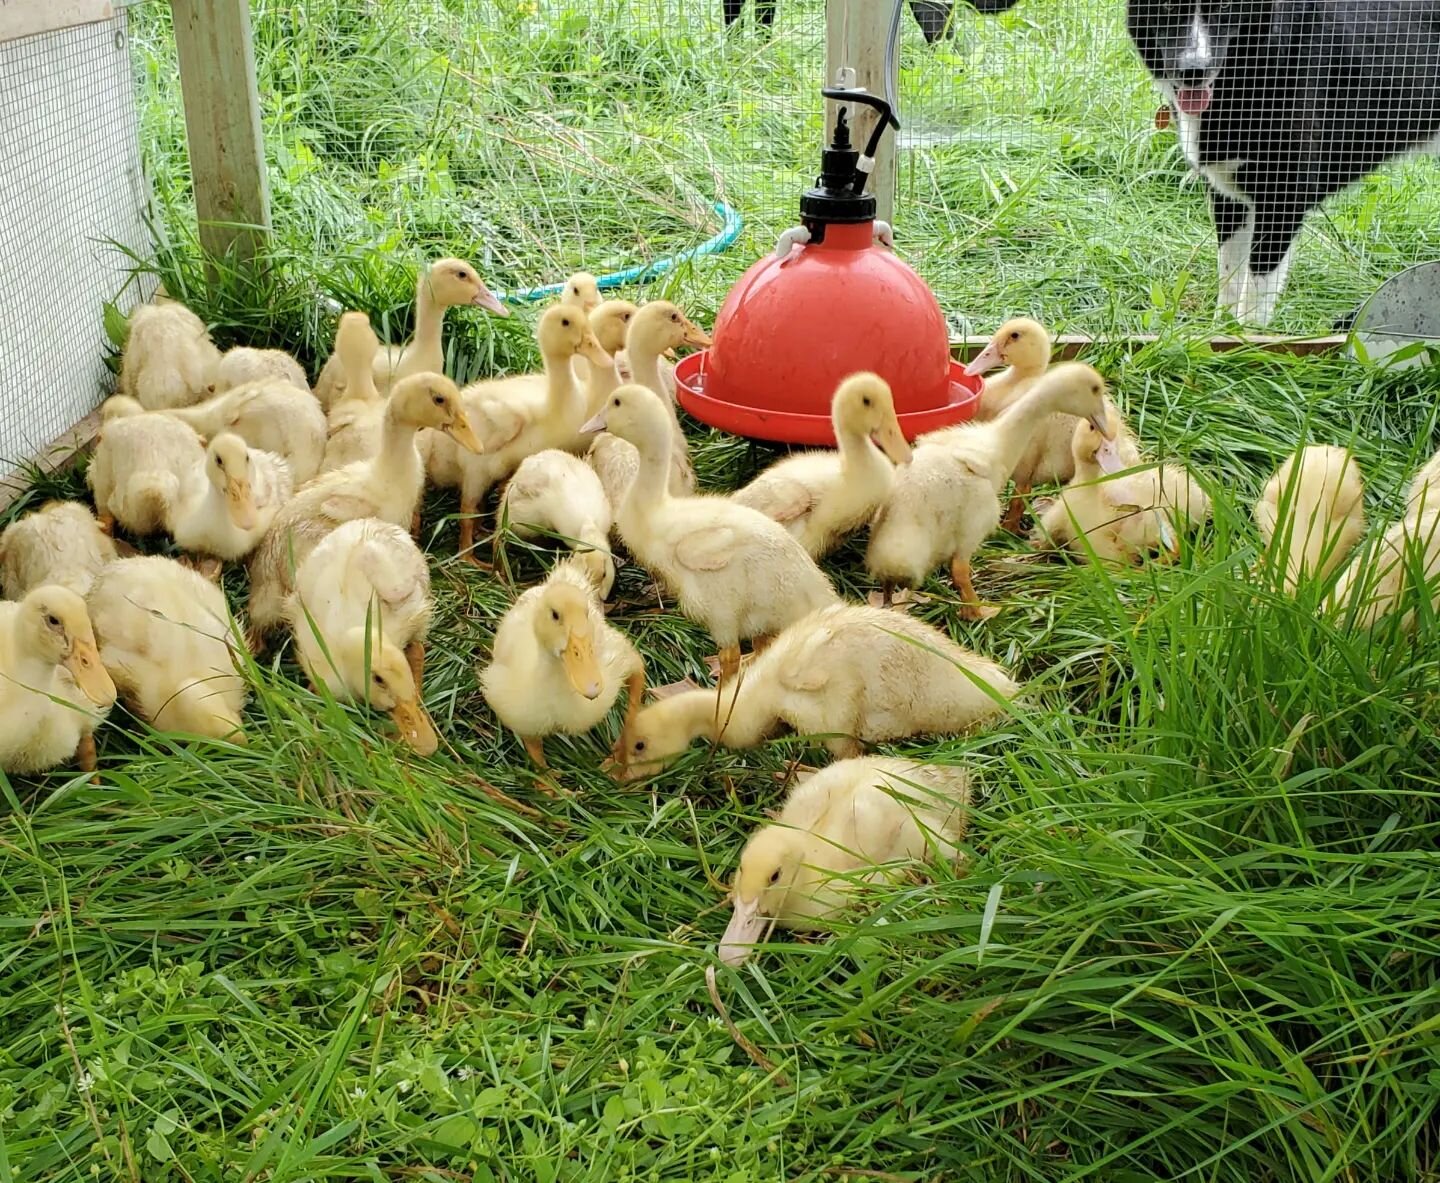 Ducklings moved out to pasture this morning
🦆🌱☀️